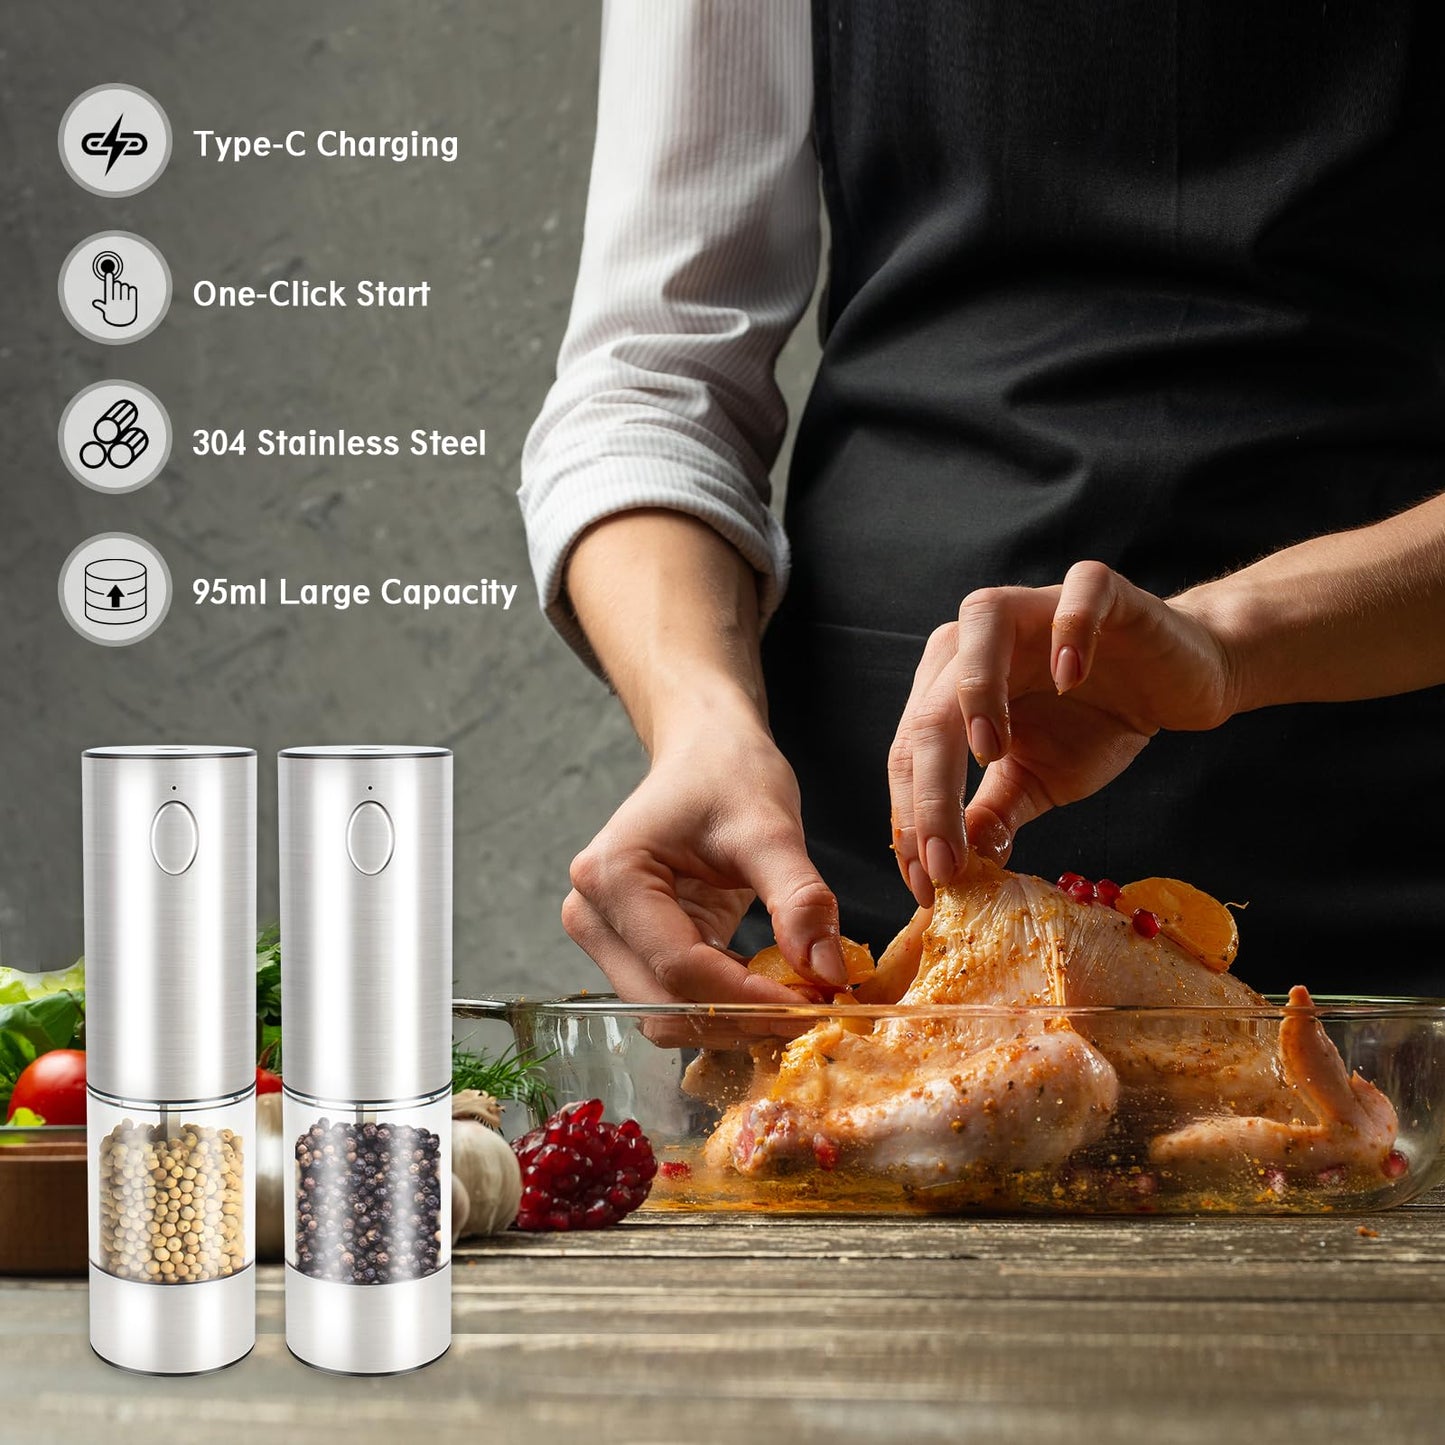 KUFUNG Electric Salt & Pepper Grinder - Automatic Spice Mill Set with Adjustable Coarseness - Refillable for Black Peppercorn & Sea Salt - USB Charge - Rechargeable (Silver-1 Pack)